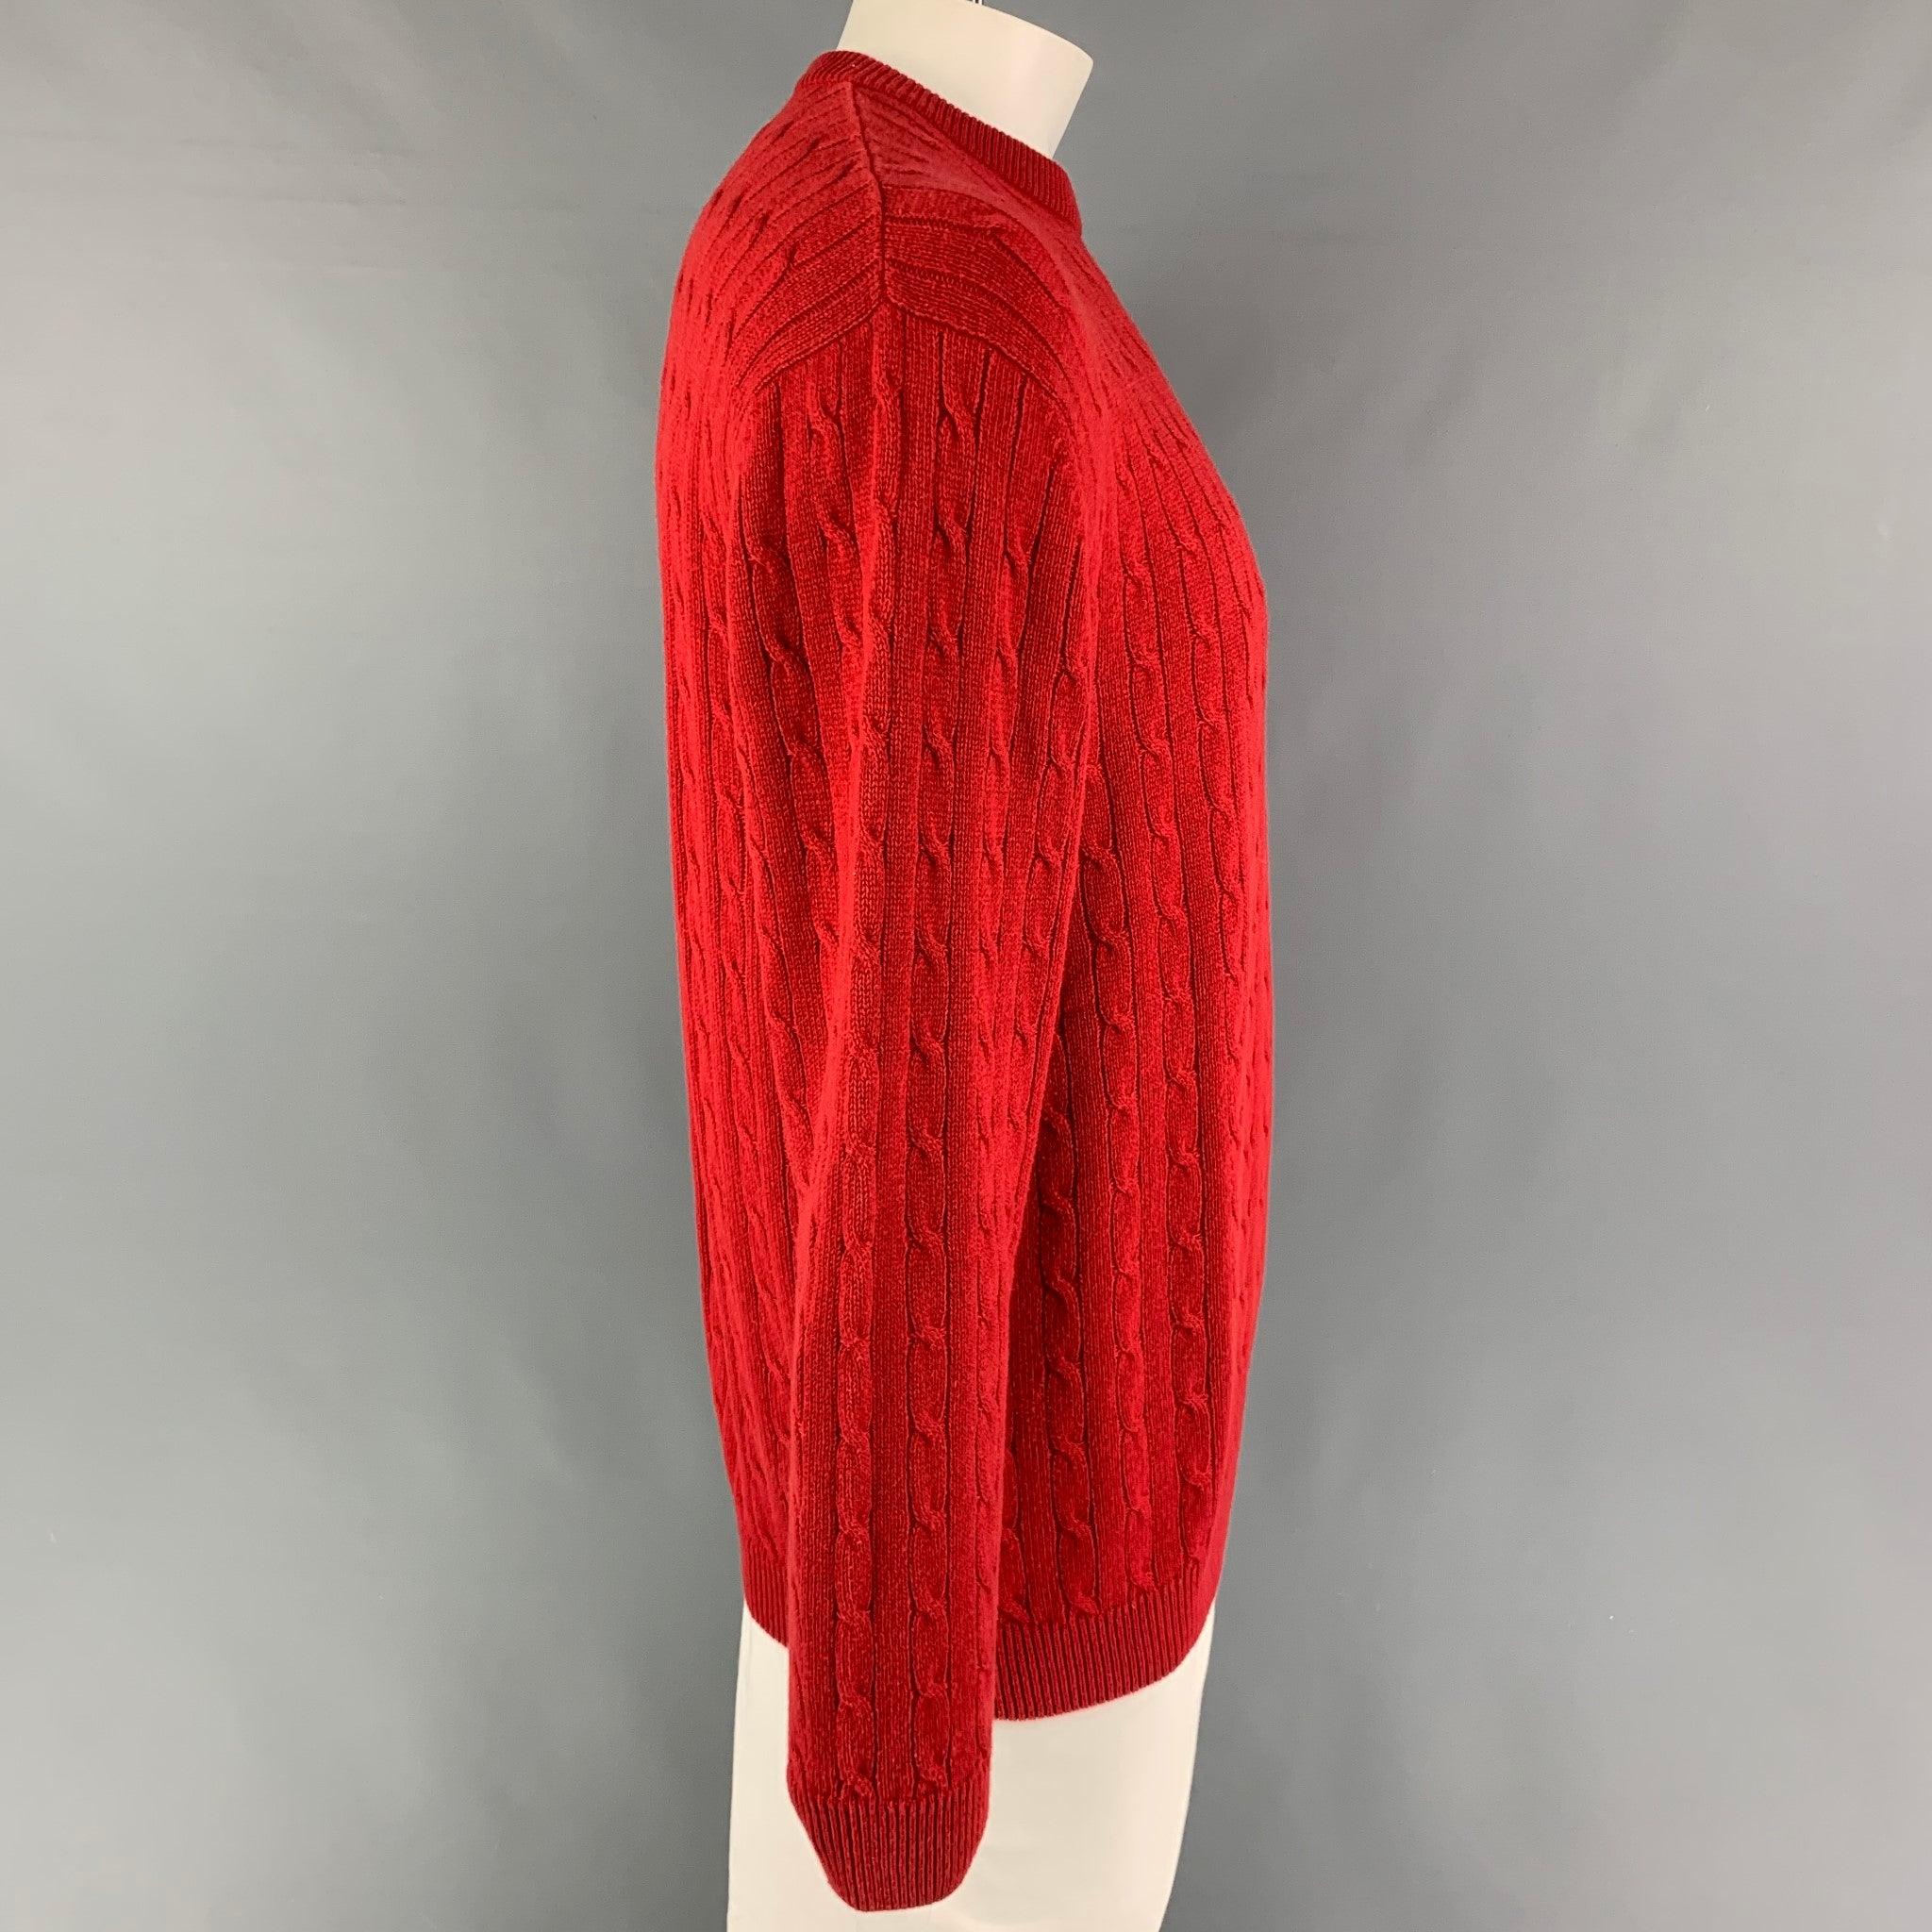 LACOSTE sweater comes in a red cable knit cotton / wool featuring a embroidered logo and a crew-neck.
Very Good
Pre-Owned Condition. 

Marked:   S 

Measurements: 
 
Shoulder: 22 inches  Chest: 48 inches  Sleeve: 26 inches  Length: 28 inches 
  
  
